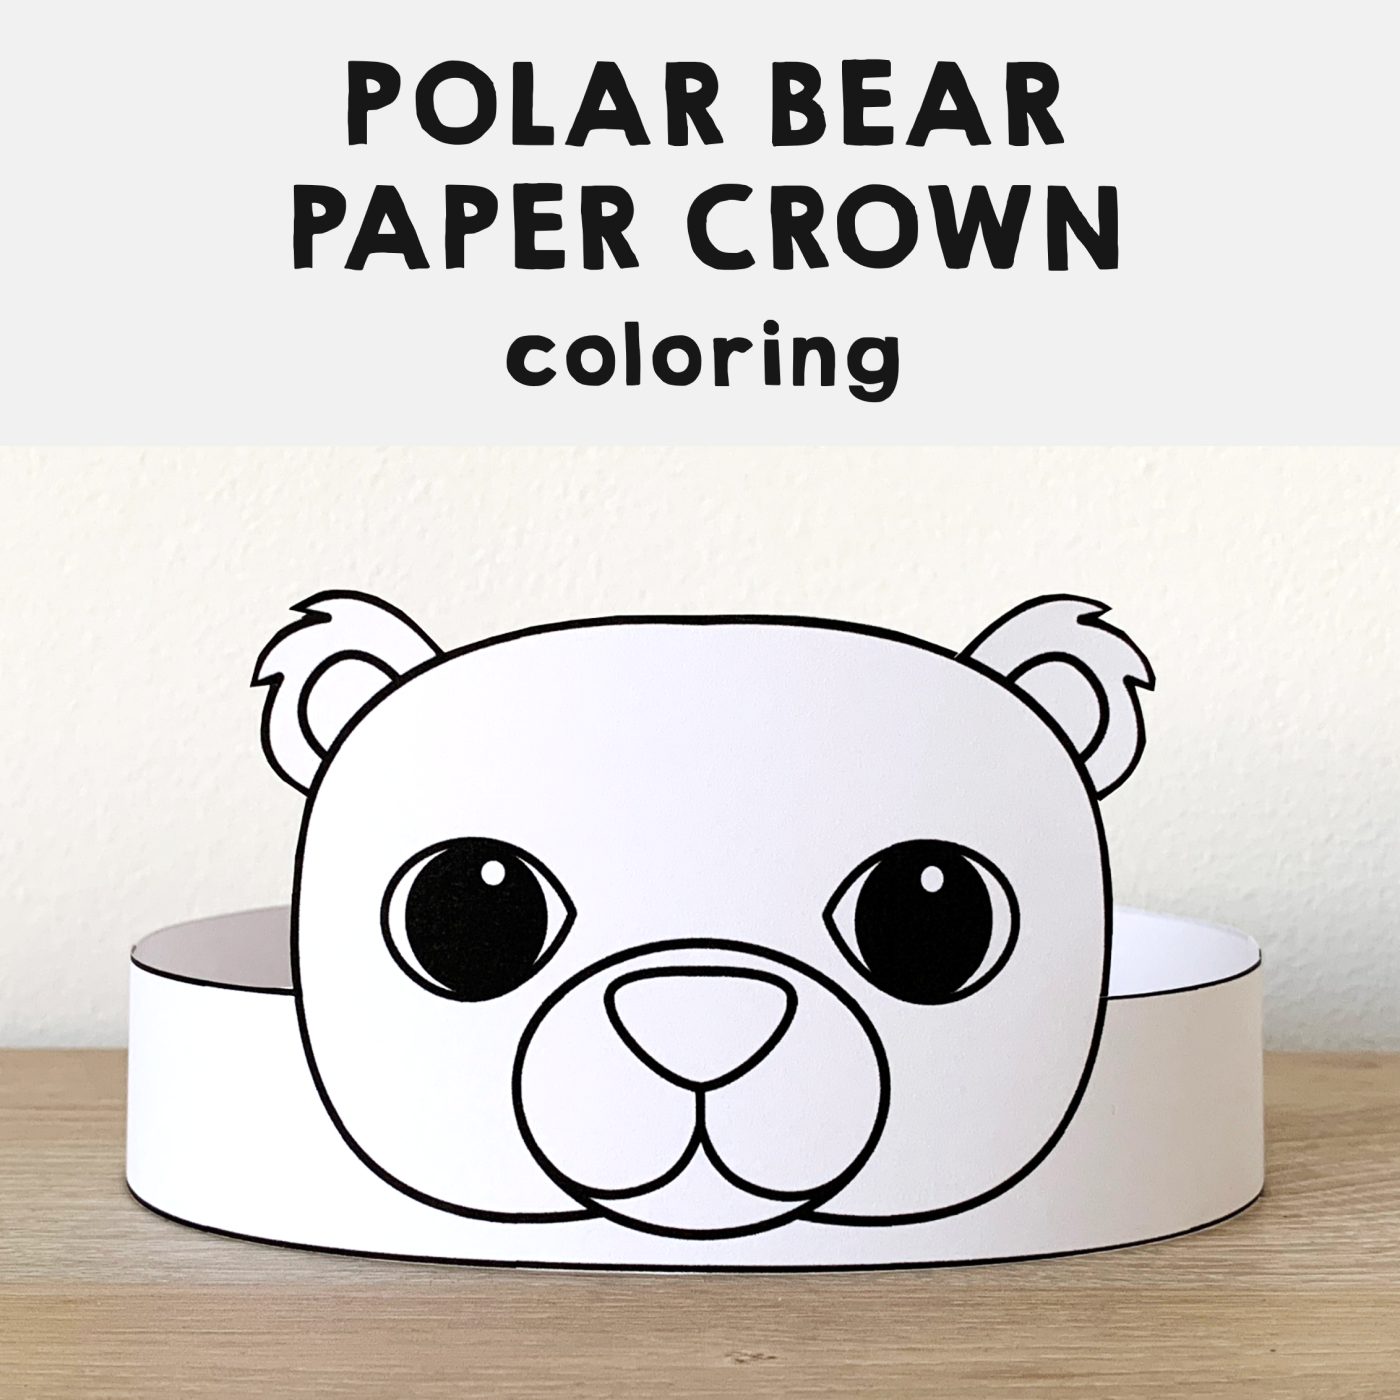 Polar bear paper crown printable coloring craft made by teachers